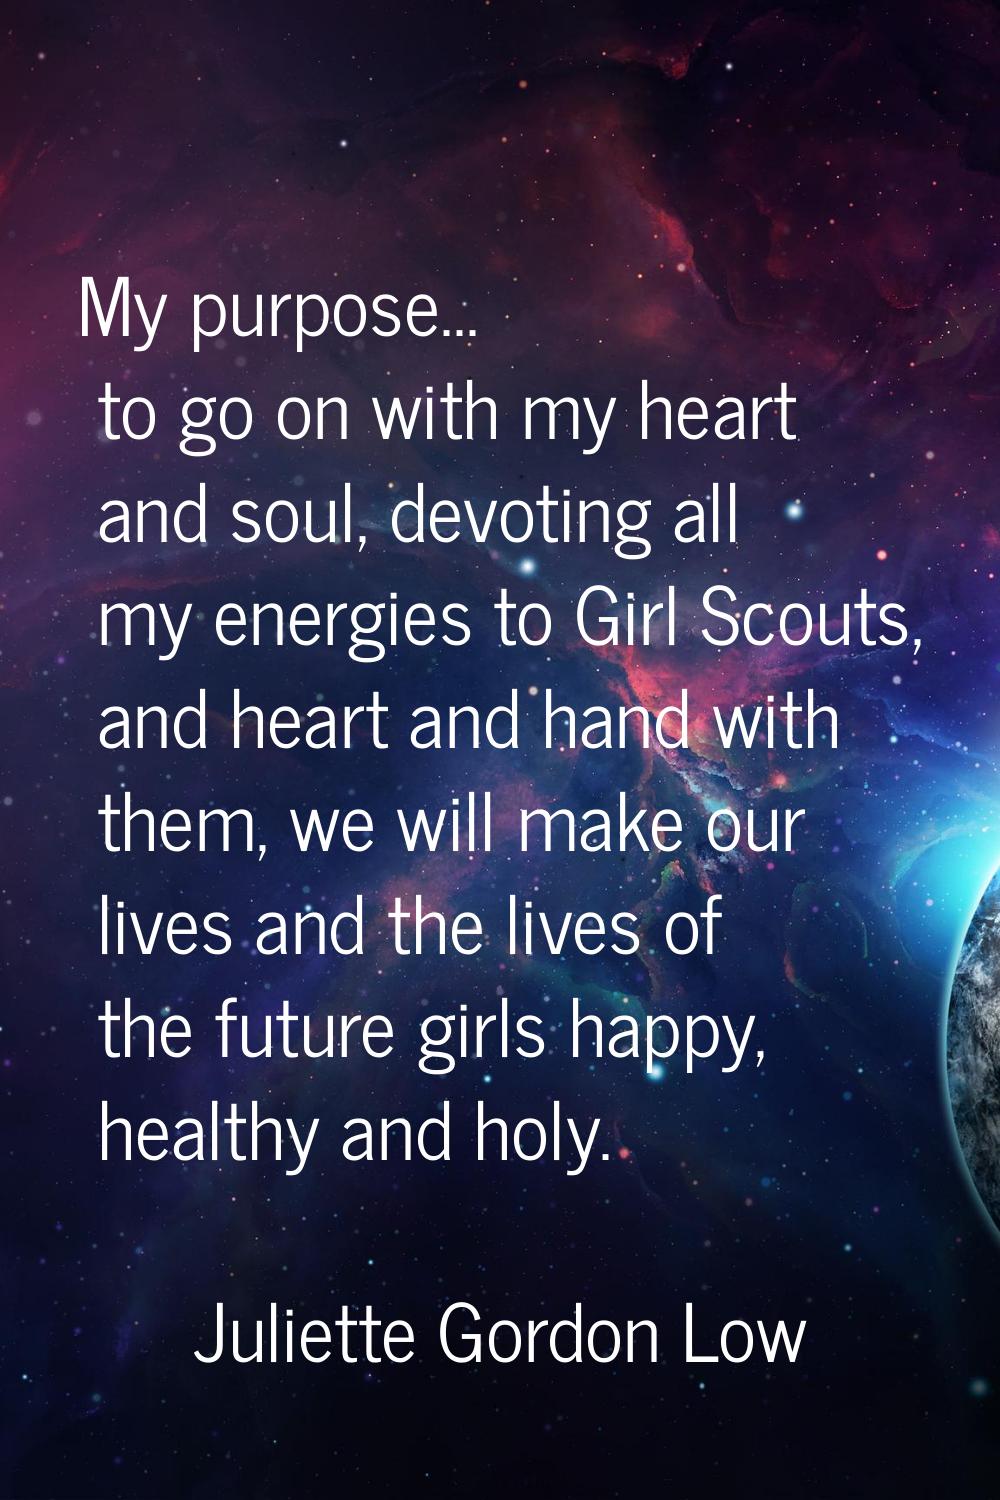 My purpose... to go on with my heart and soul, devoting all my energies to Girl Scouts, and heart a